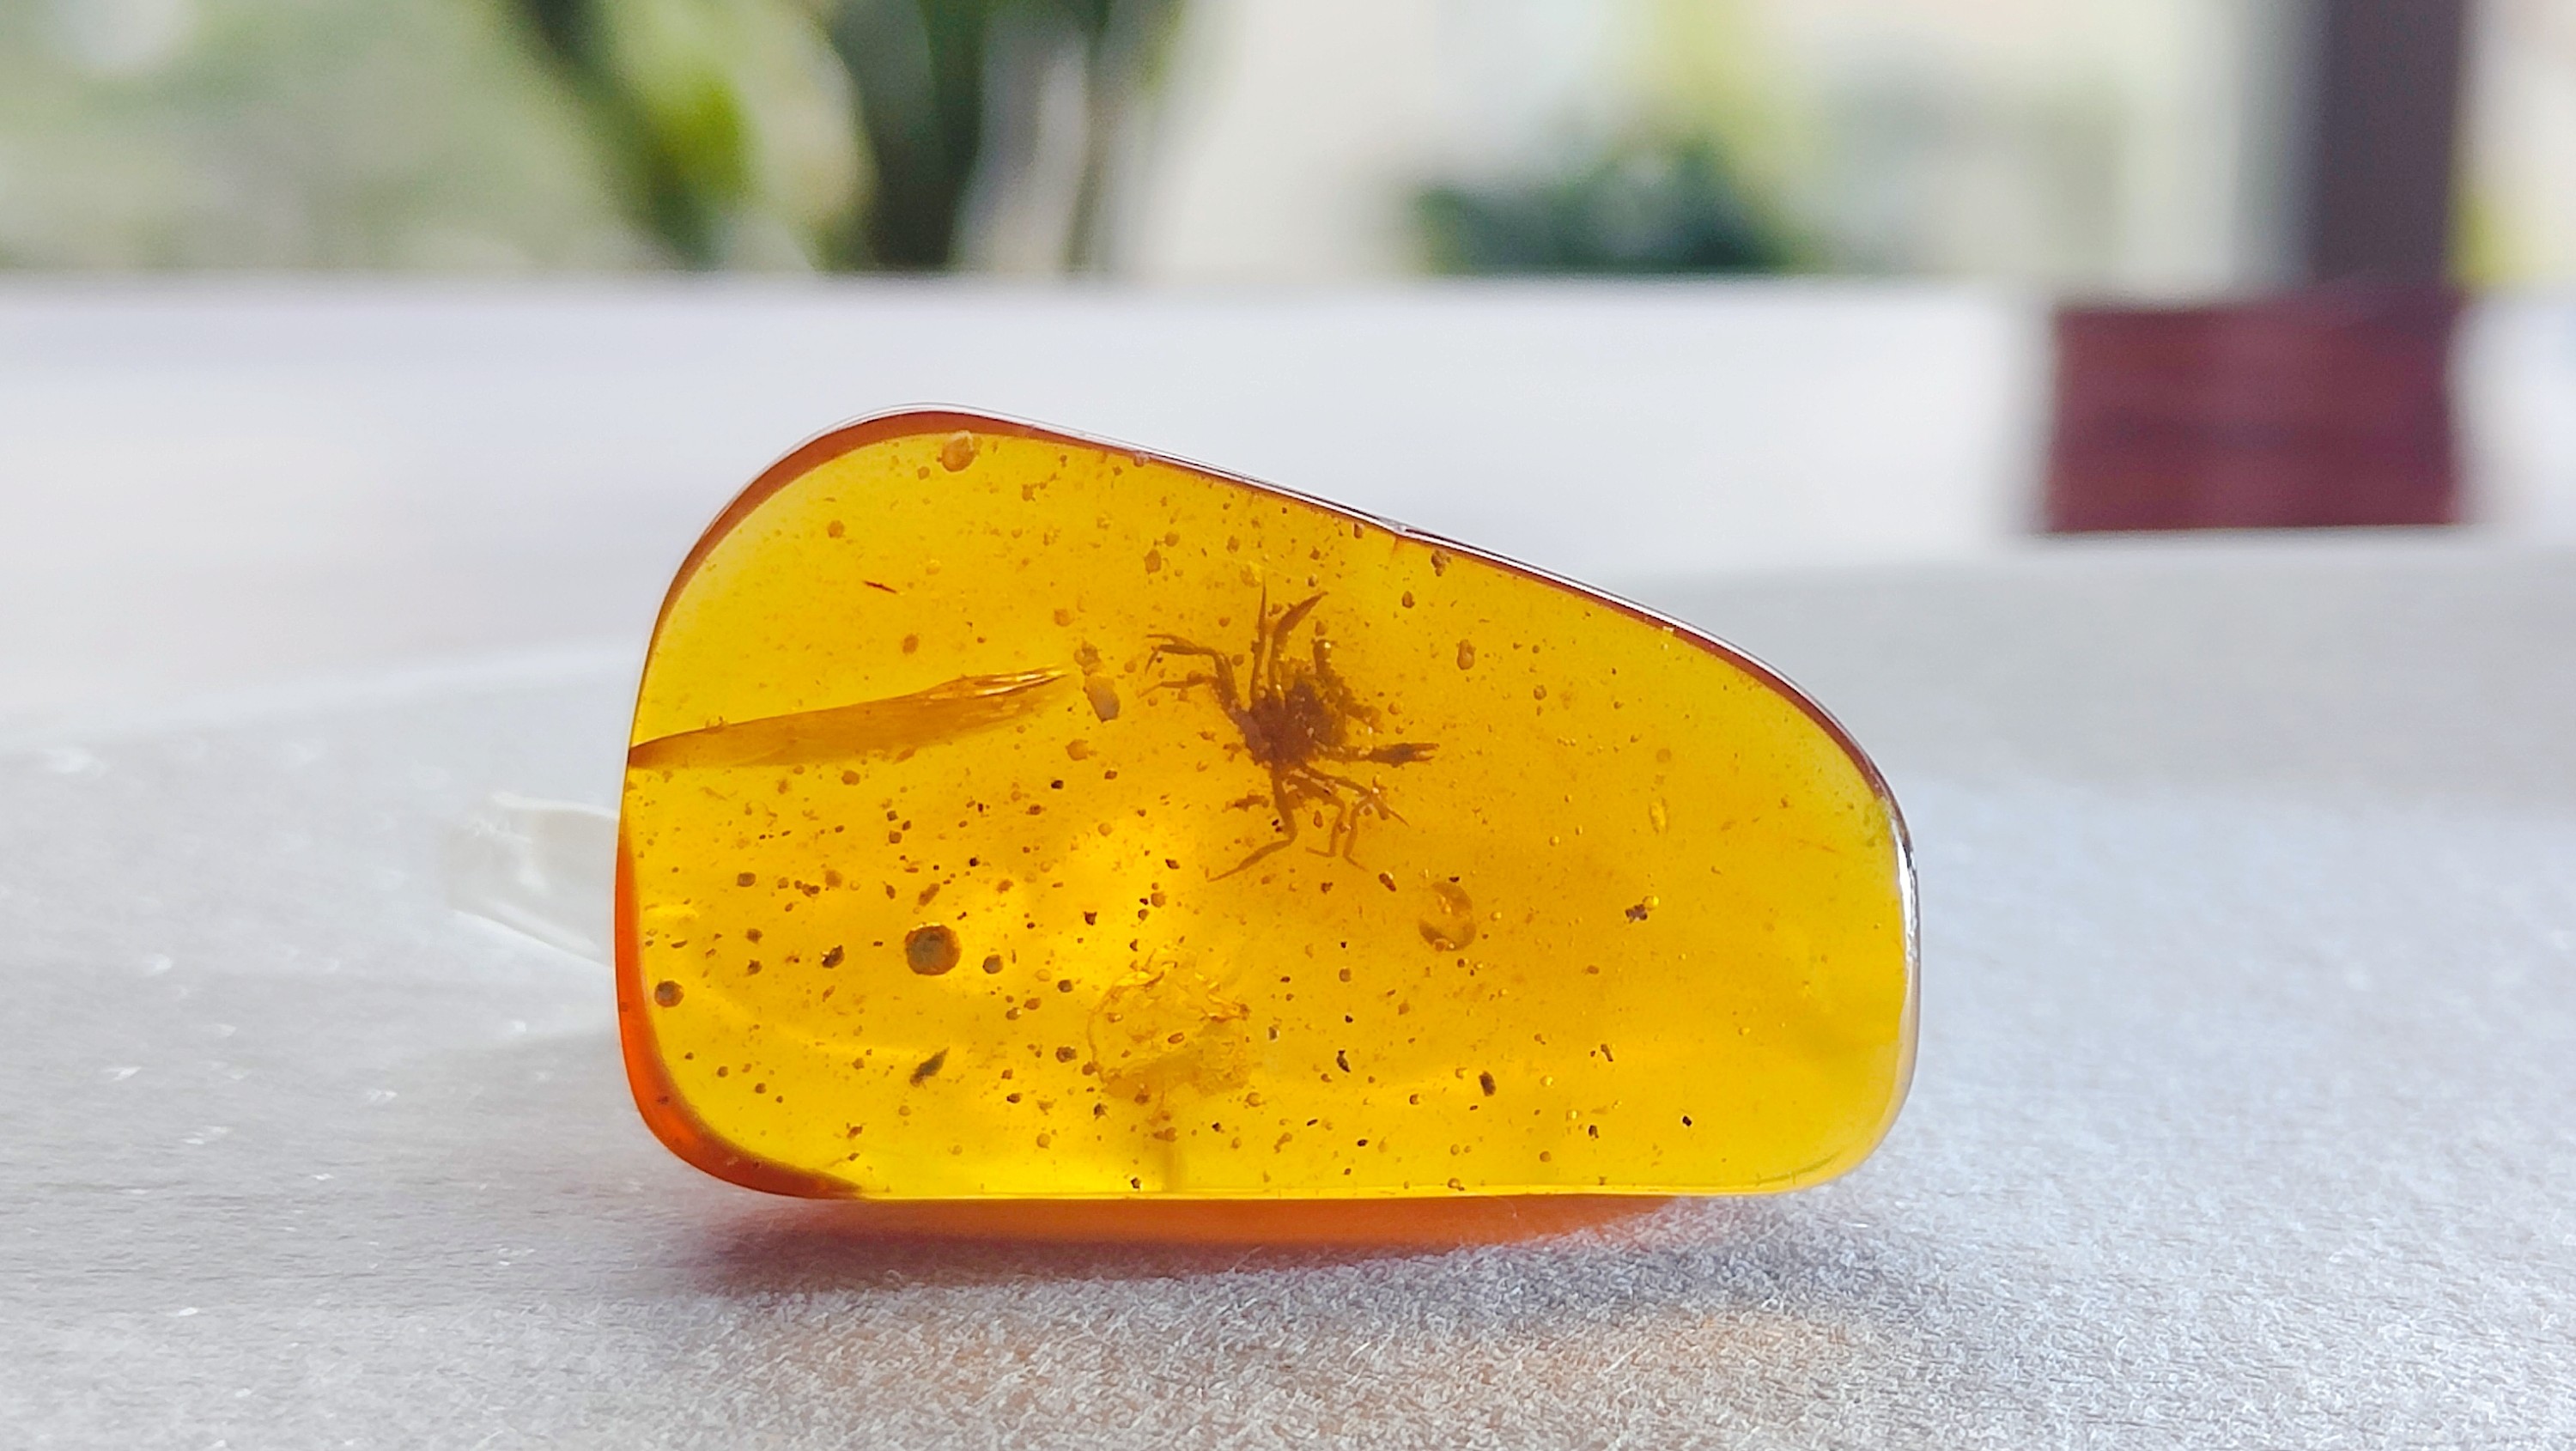 The two-millimetre-long fossil of the ancient crab was found encased in a piece of amber jewelry at a market in Tengchong, China. (Photo: Lida Xing)